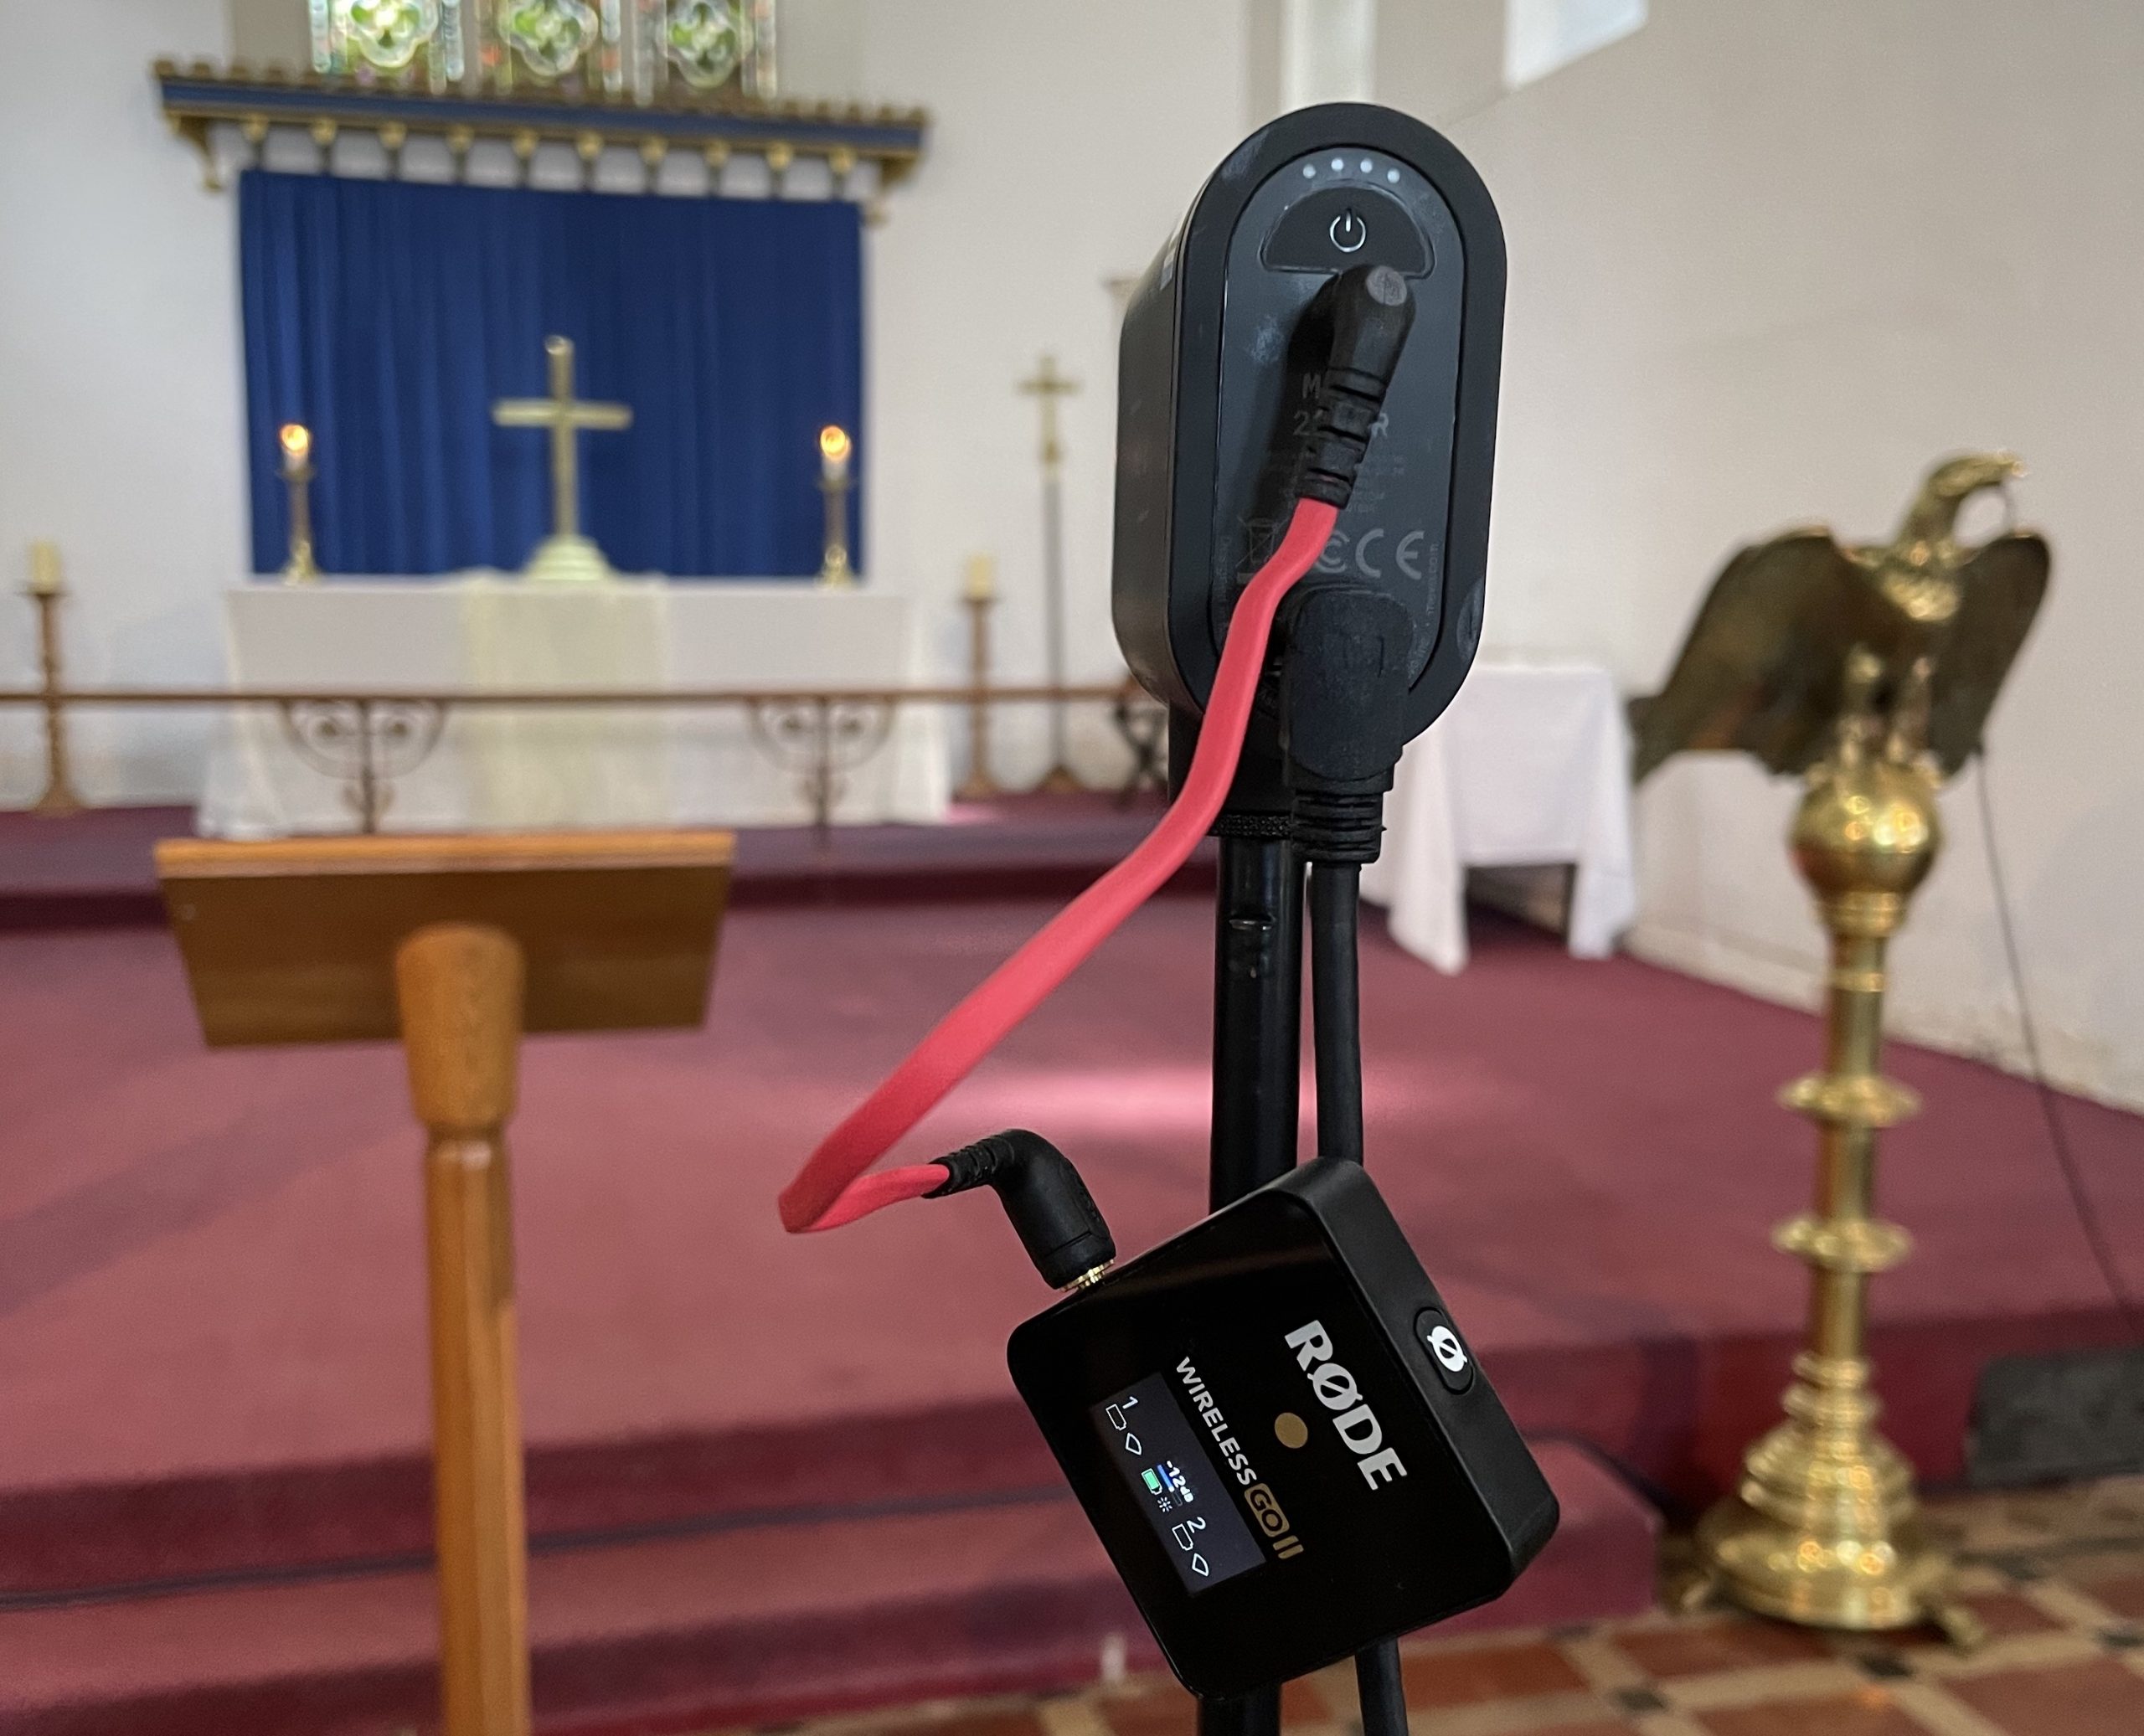 A Mevo Start Camera with a Rode Wireless Go receiver pointing at the front of an anglican church with a cross on the communion table.